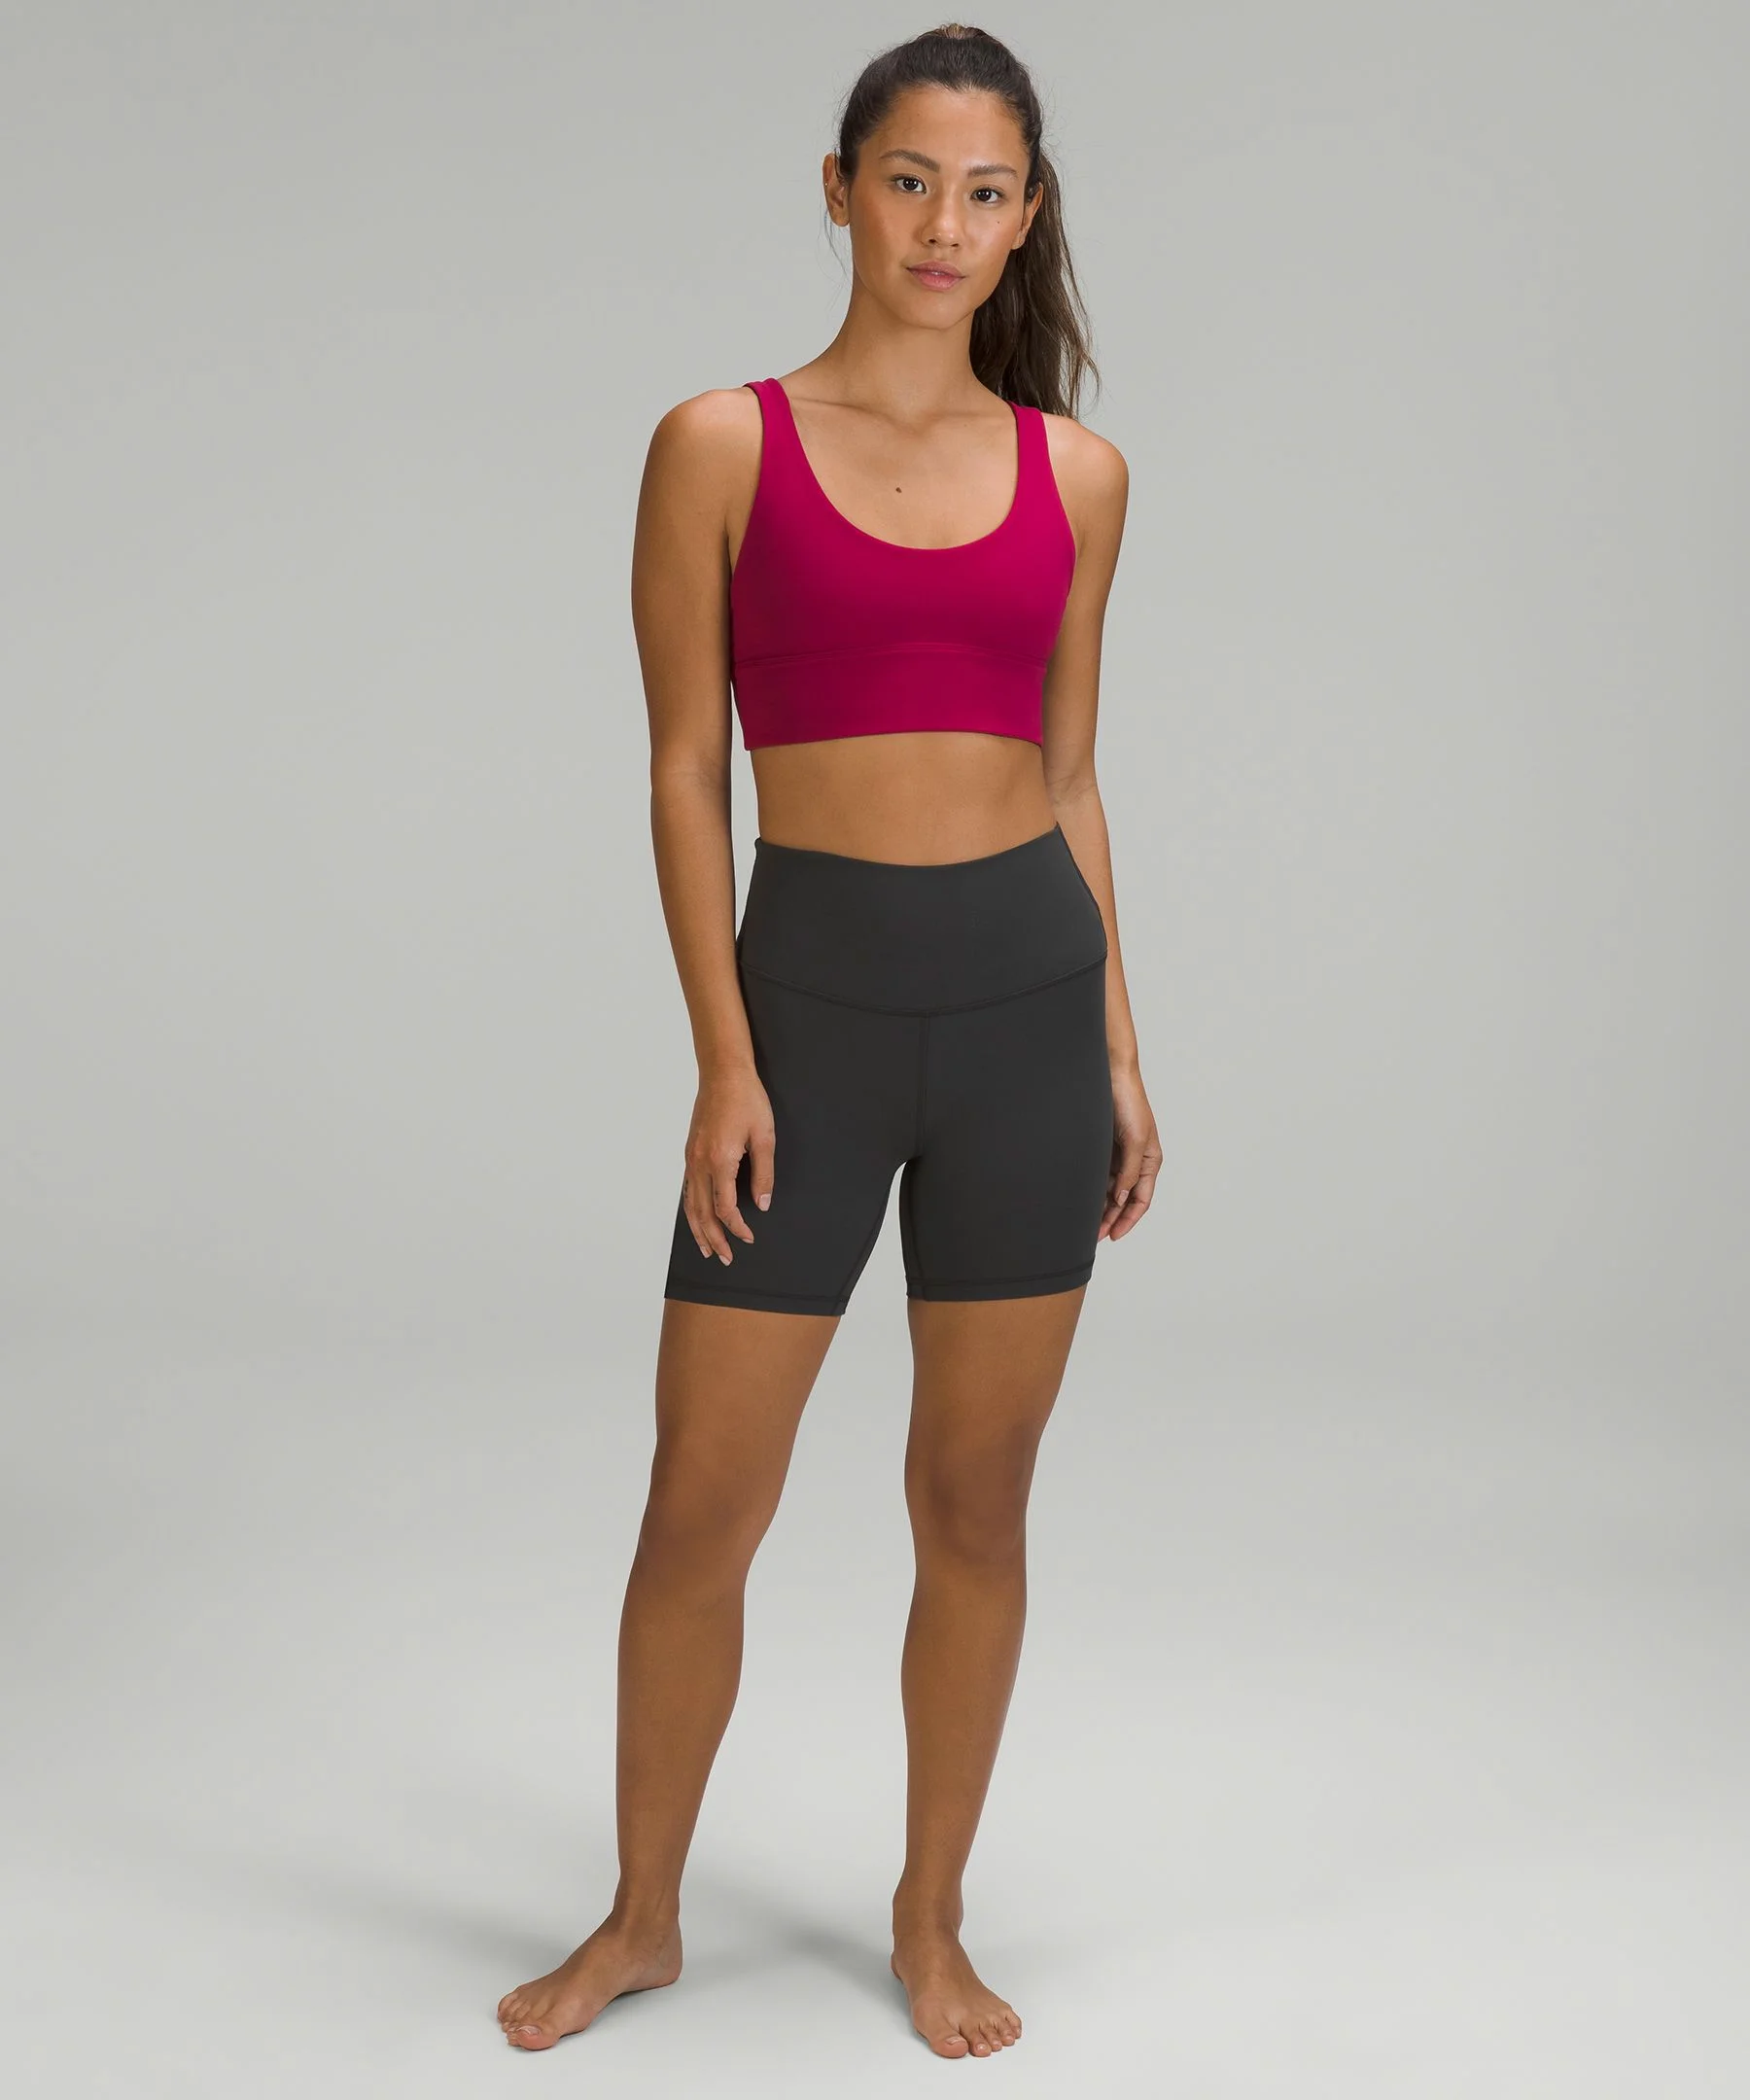 Lululemon Align™ Reversible Bra Light Support, A/b Cup In Mineral